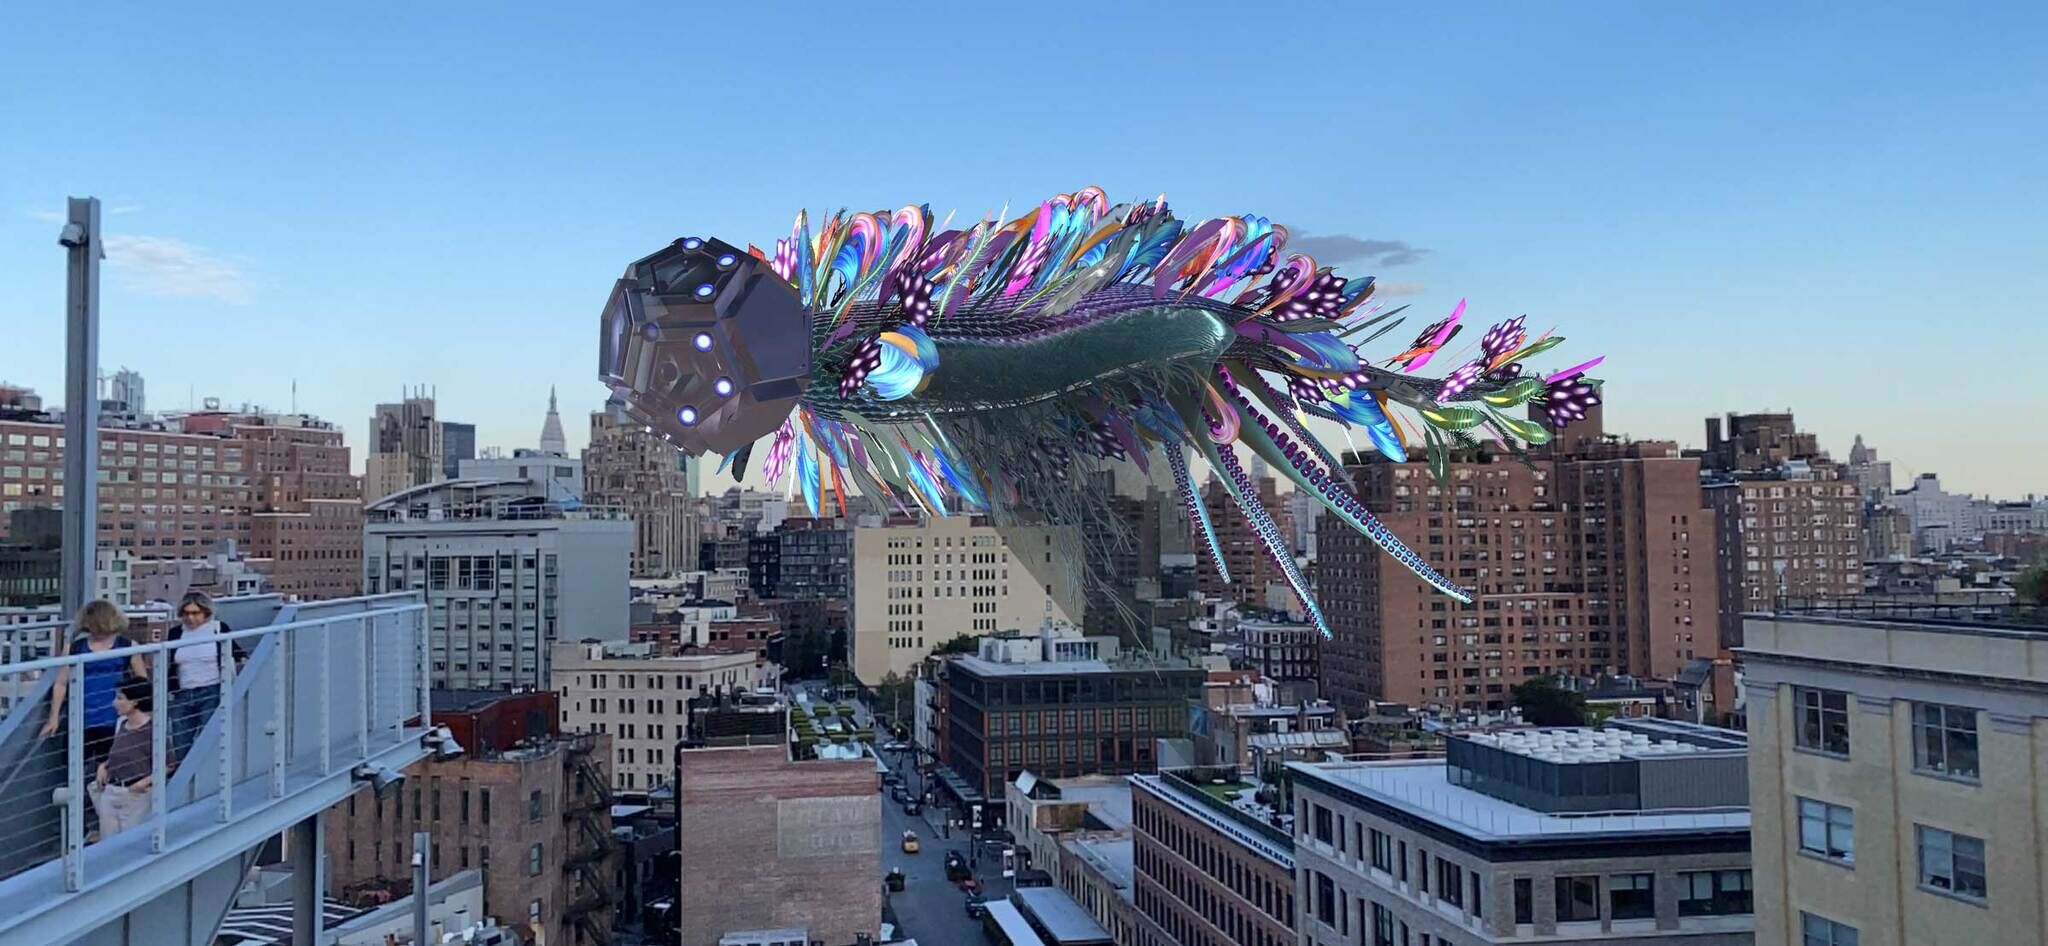 A large creature floats over buildings with many feathers fluttering around its body.